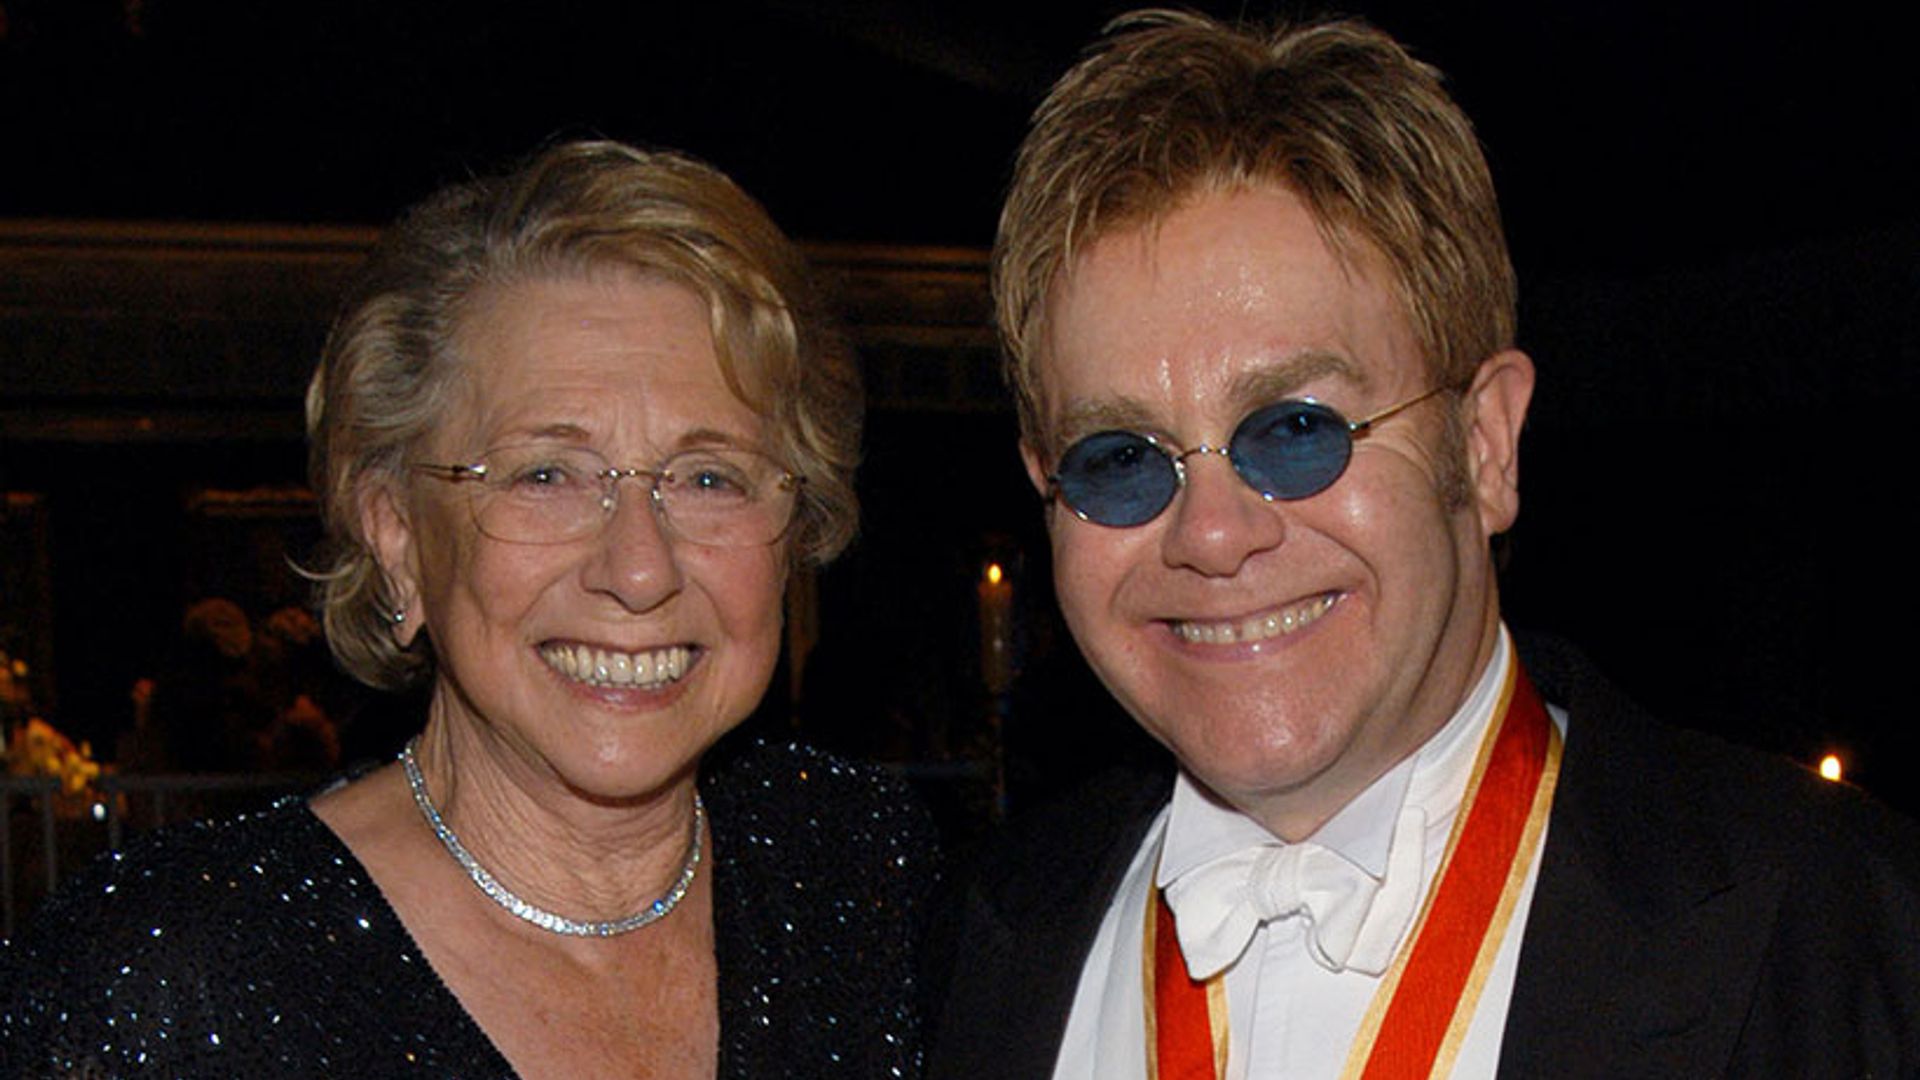 Elton John pays heartbreaking tribute following mother's funeral: 'Thank you for bringing me into the world'